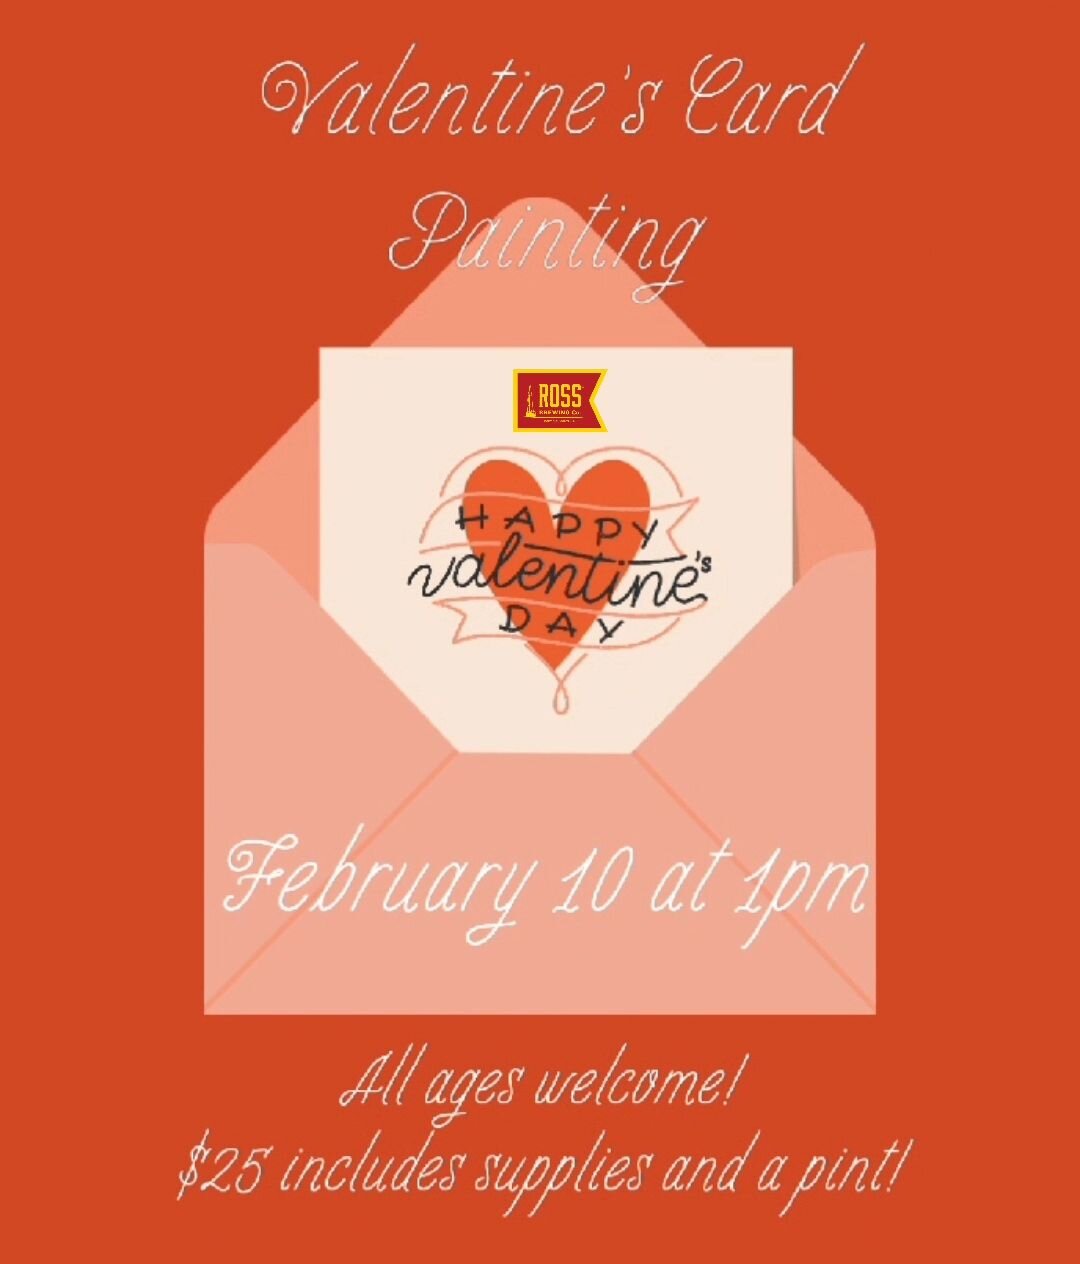 🚨 𝗘𝗩𝗘𝗡𝗧 𝗔𝗡𝗡𝗢𝗨𝗡𝗖𝗘𝗠𝗘𝗡𝗧!🚨

Saturday at 1pm! At the one and only world famous Ross Brewing!

Paint your own Valentine's Day Card!! ❤️🩷💜🖌🎨🍺

𝗔𝗹𝗹 𝗮𝗴𝗲𝘀 𝗮𝗿𝗲 𝘄𝗲𝗹𝗰𝗼𝗺𝗲 at this Paint &amp; Sip event, we'll even have color